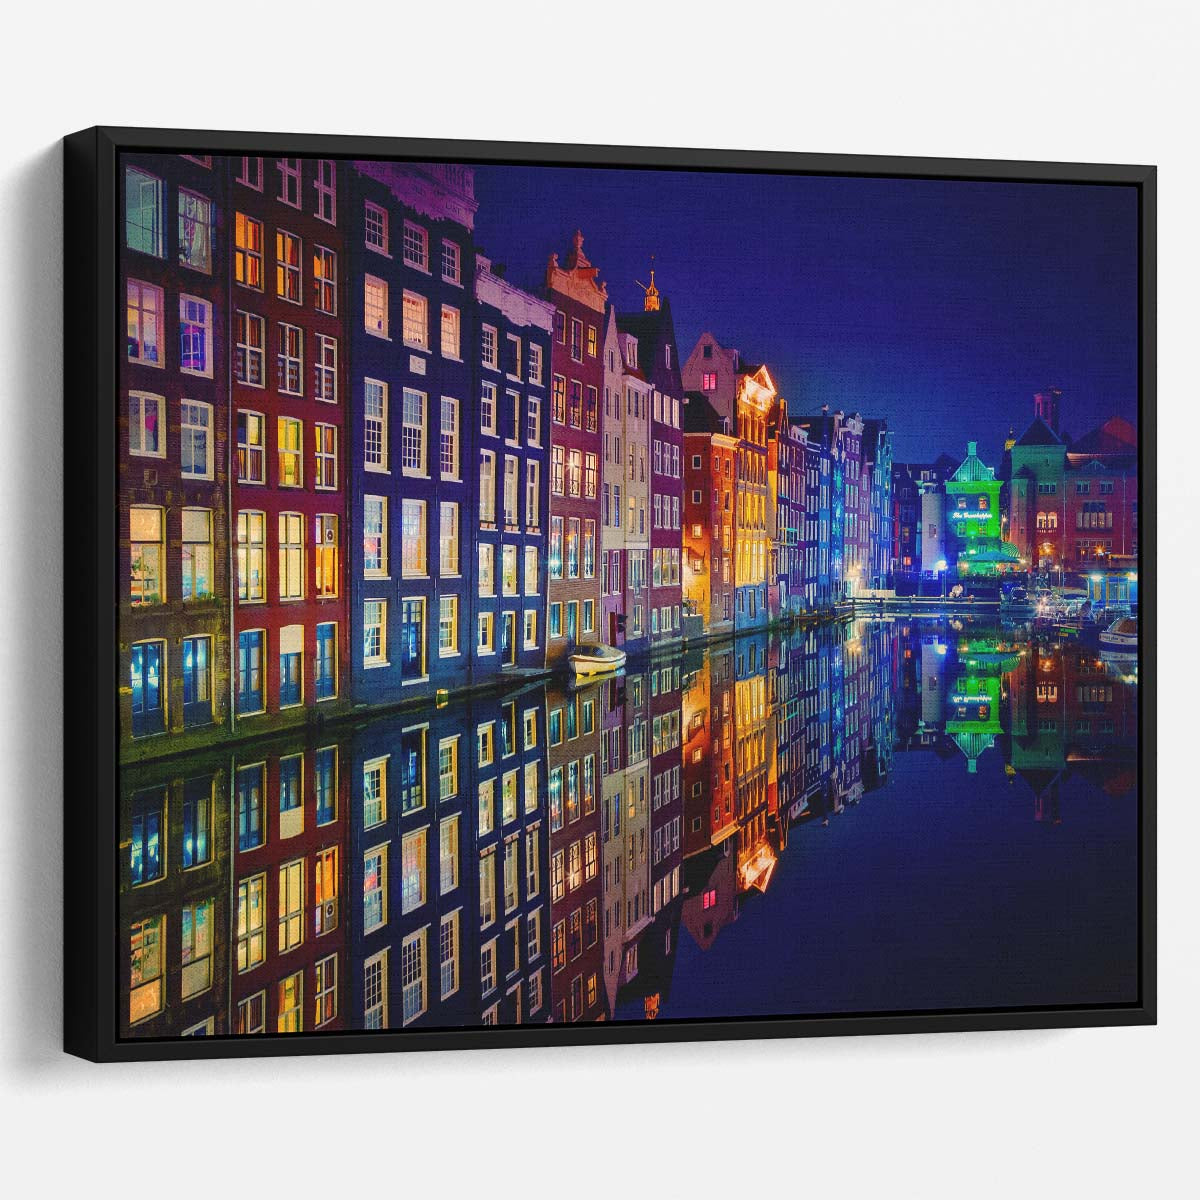 Amsterdam Canal Nightscape Colorful Urban Reflection Wall Art by Luxuriance Designs. Made in USA.